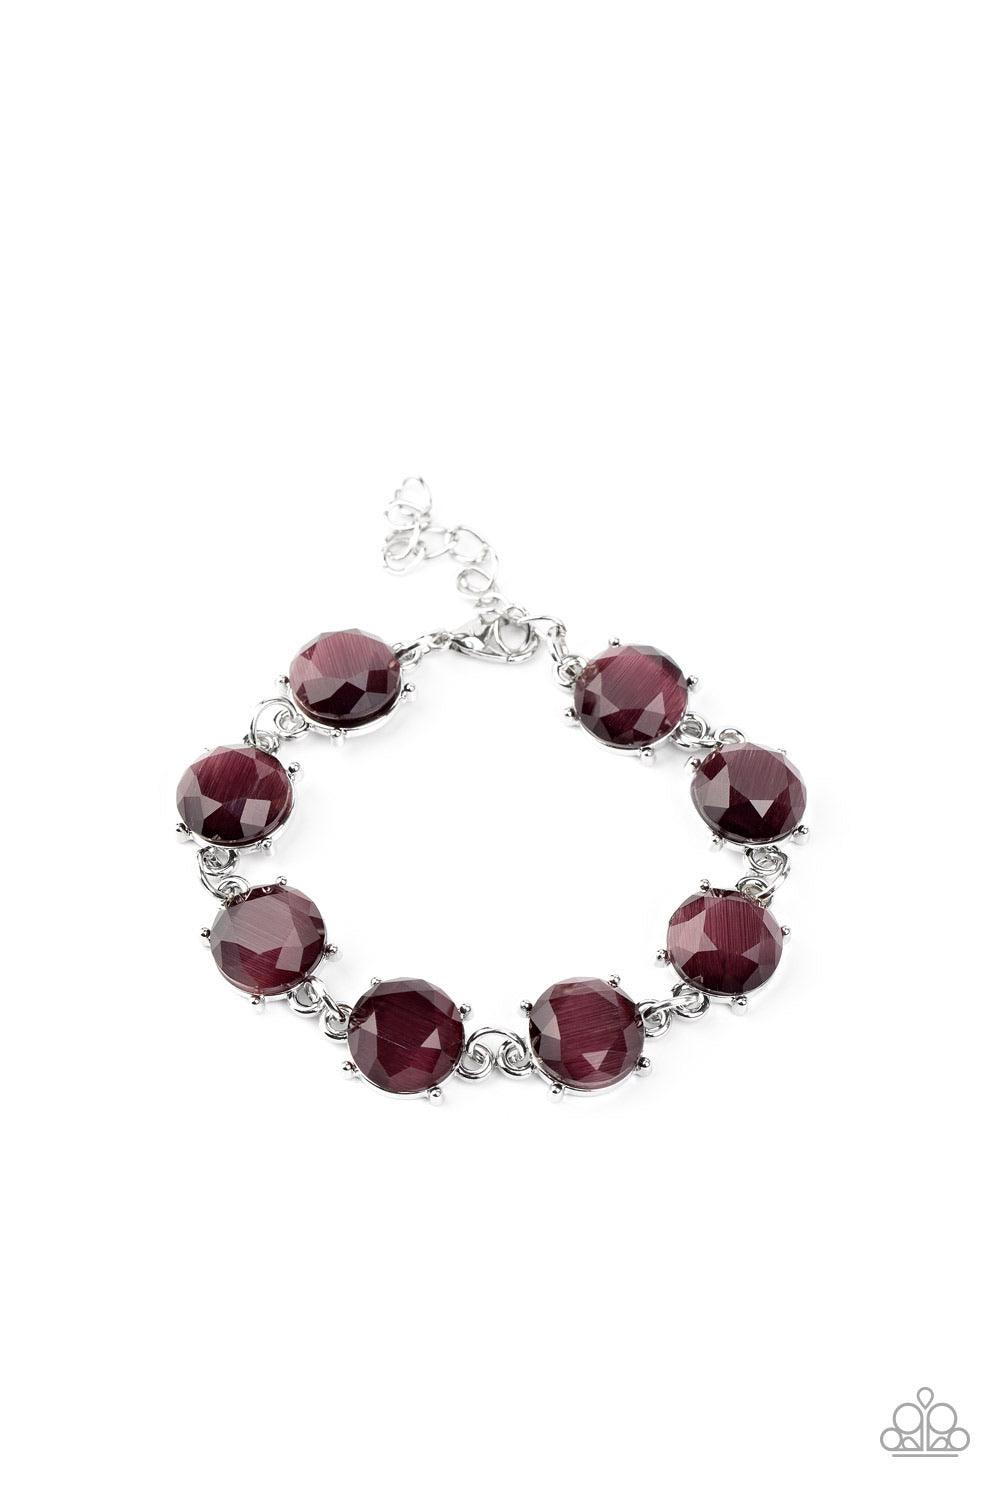 Paparazzi Accessories Ms. GLOW-It-All - Purple A glowing collection of faceted purple cat's eye stone frames delicately connect across the wrist for an ethereal look. Features an adjustable clasp closure. Sold as one individual bracelet. Jewelry